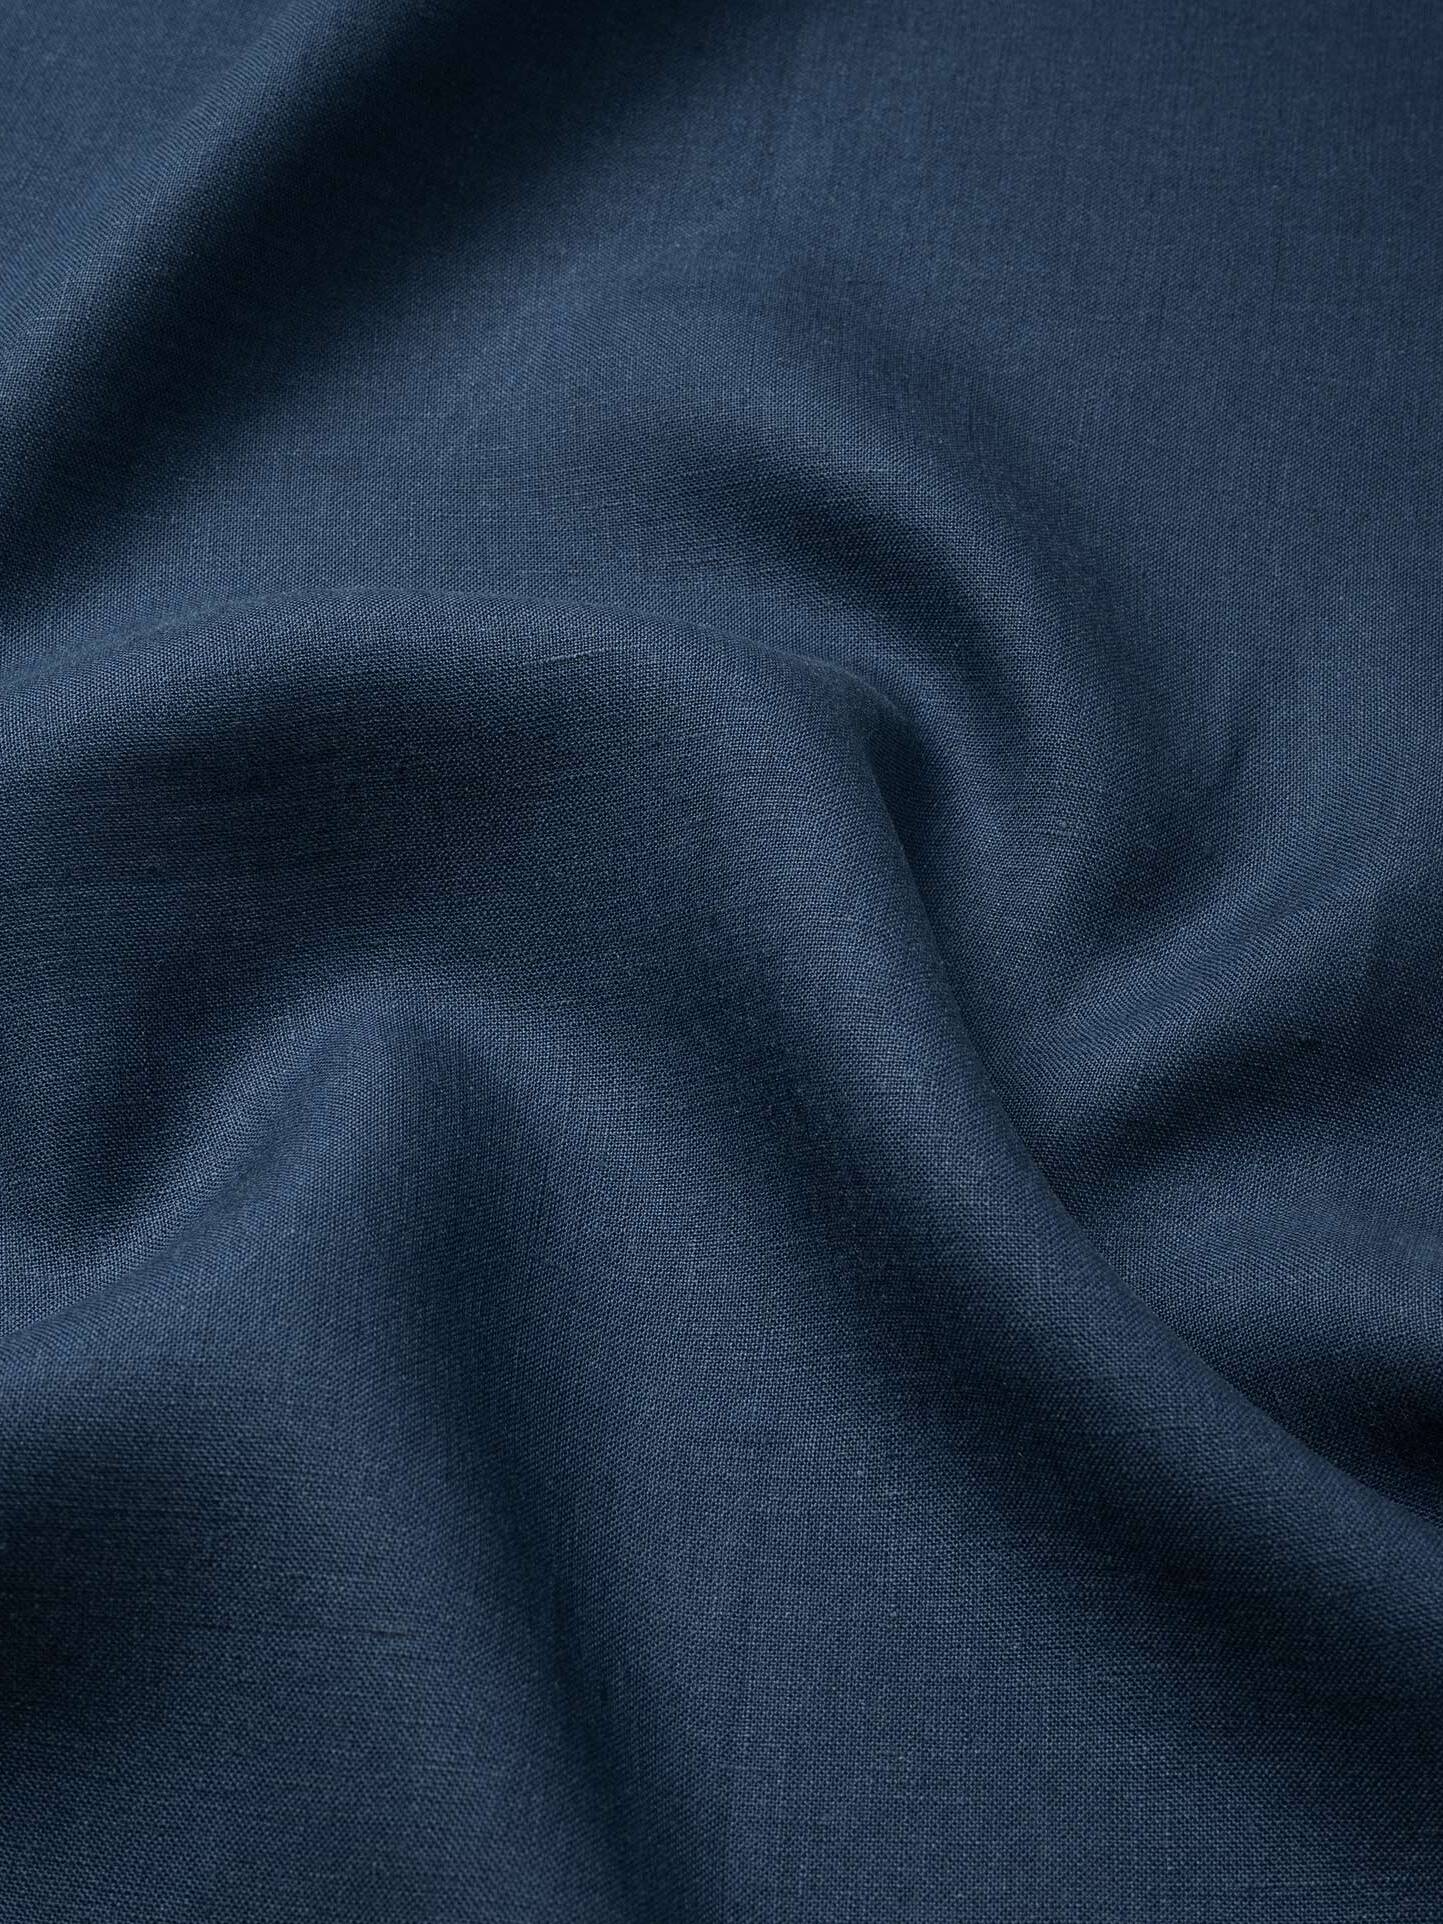 Washed Navy Linen Shirts by Proper Cloth